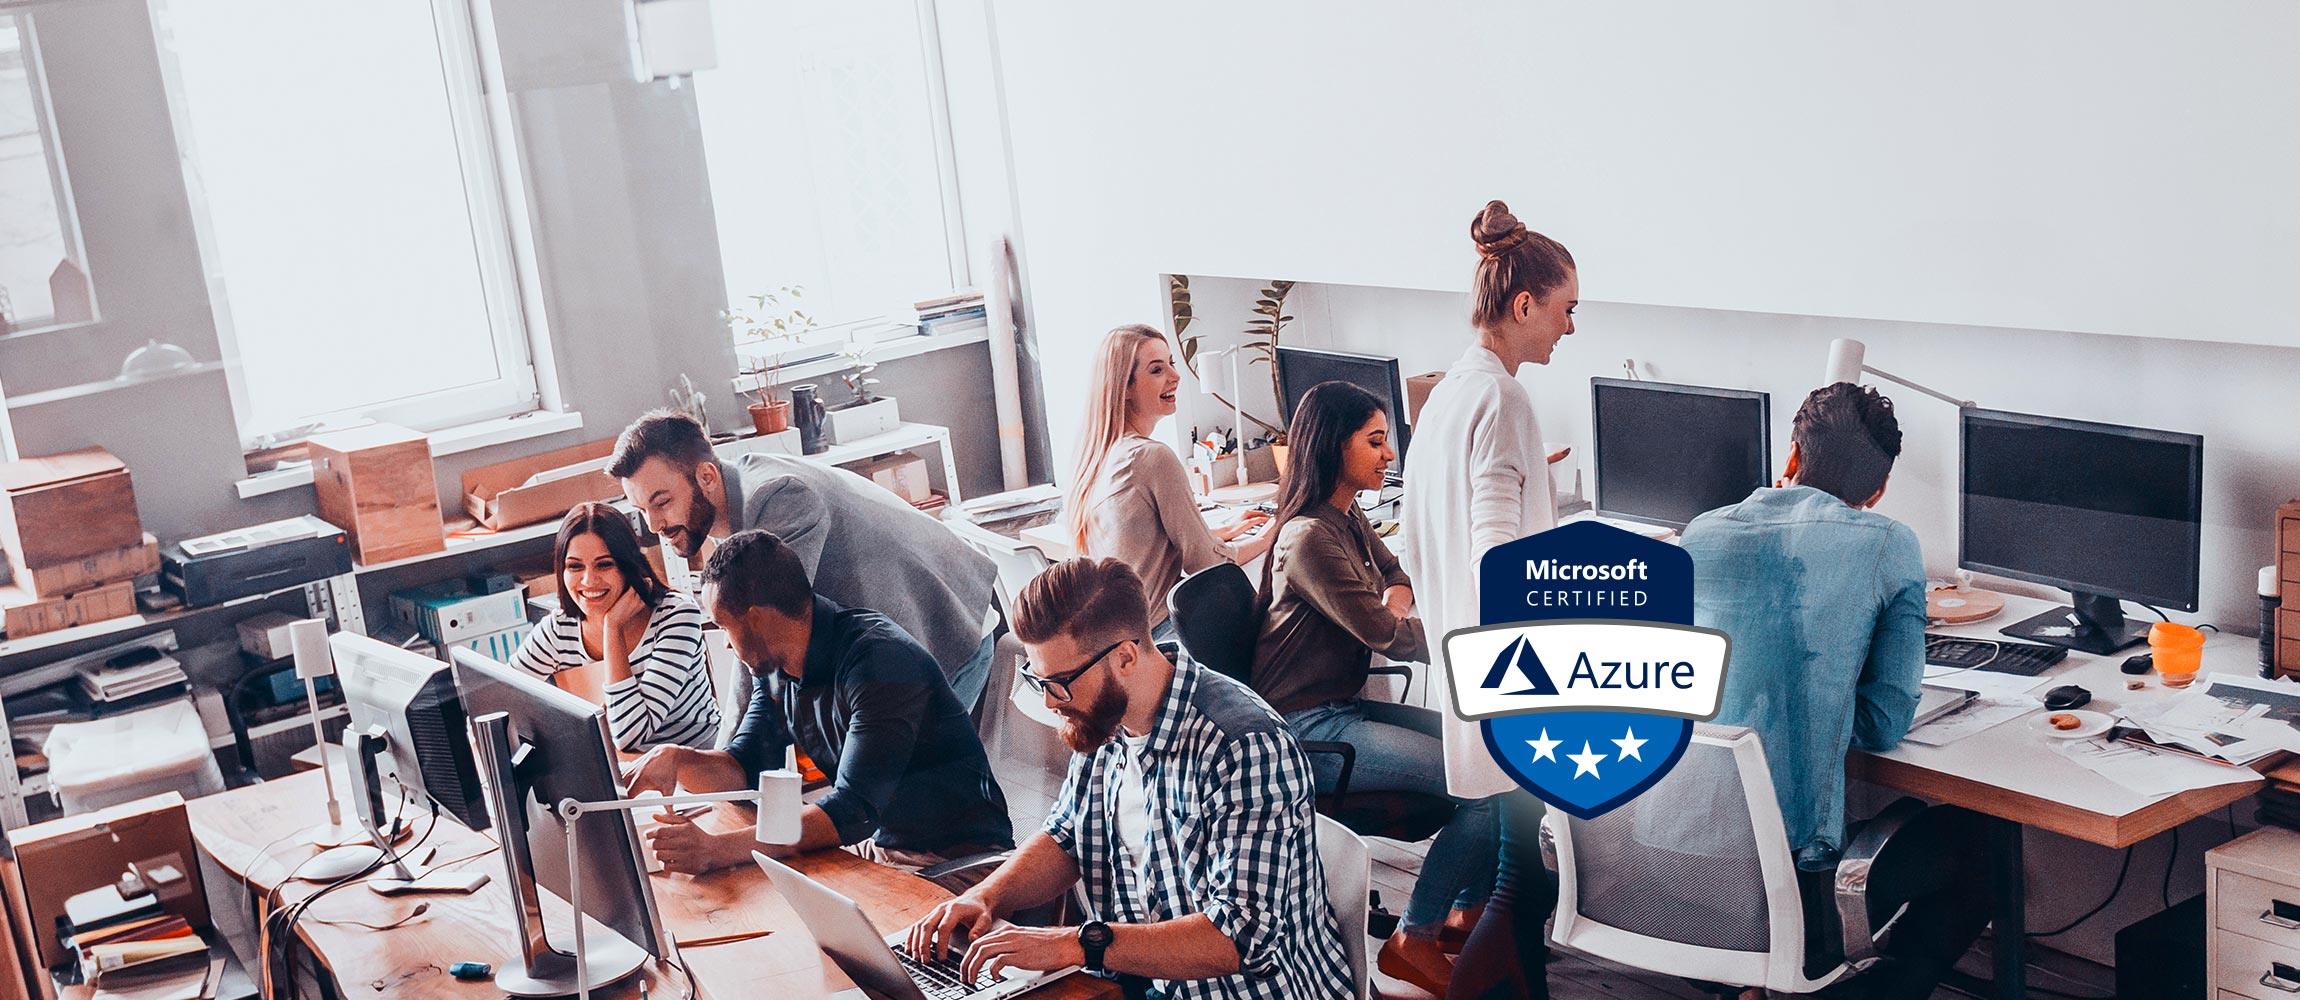 Huge Savings Off Our Top Microsoft Azure Training Bootcamps!